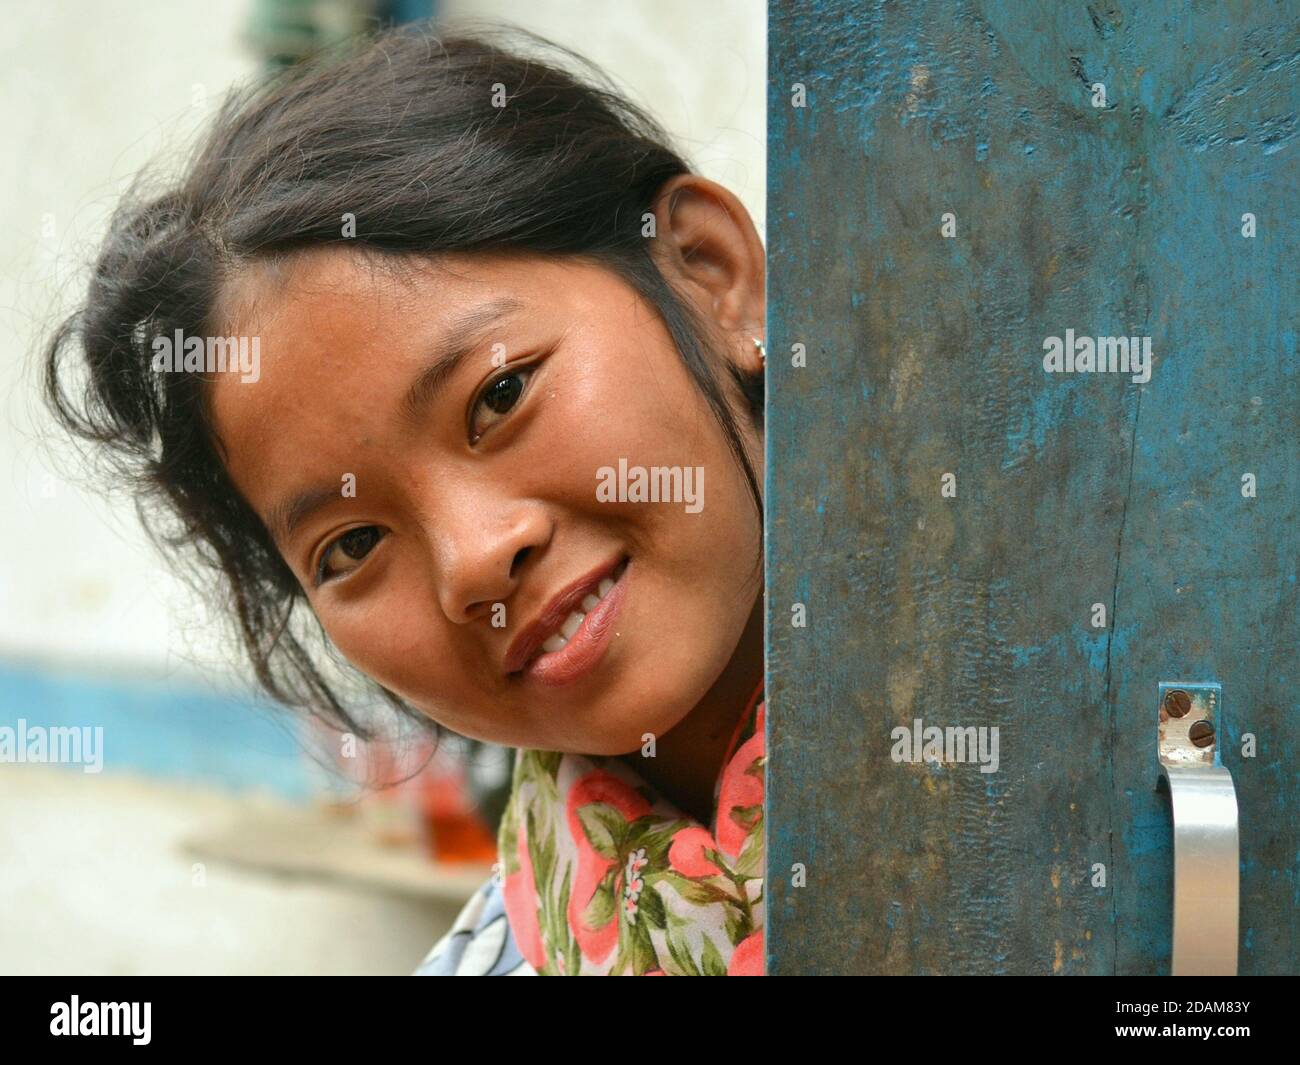 Pretty Northeast Indian Apatani pre-teen girl smiles for the camera and peeks around a blue wooden door. Stock Photo